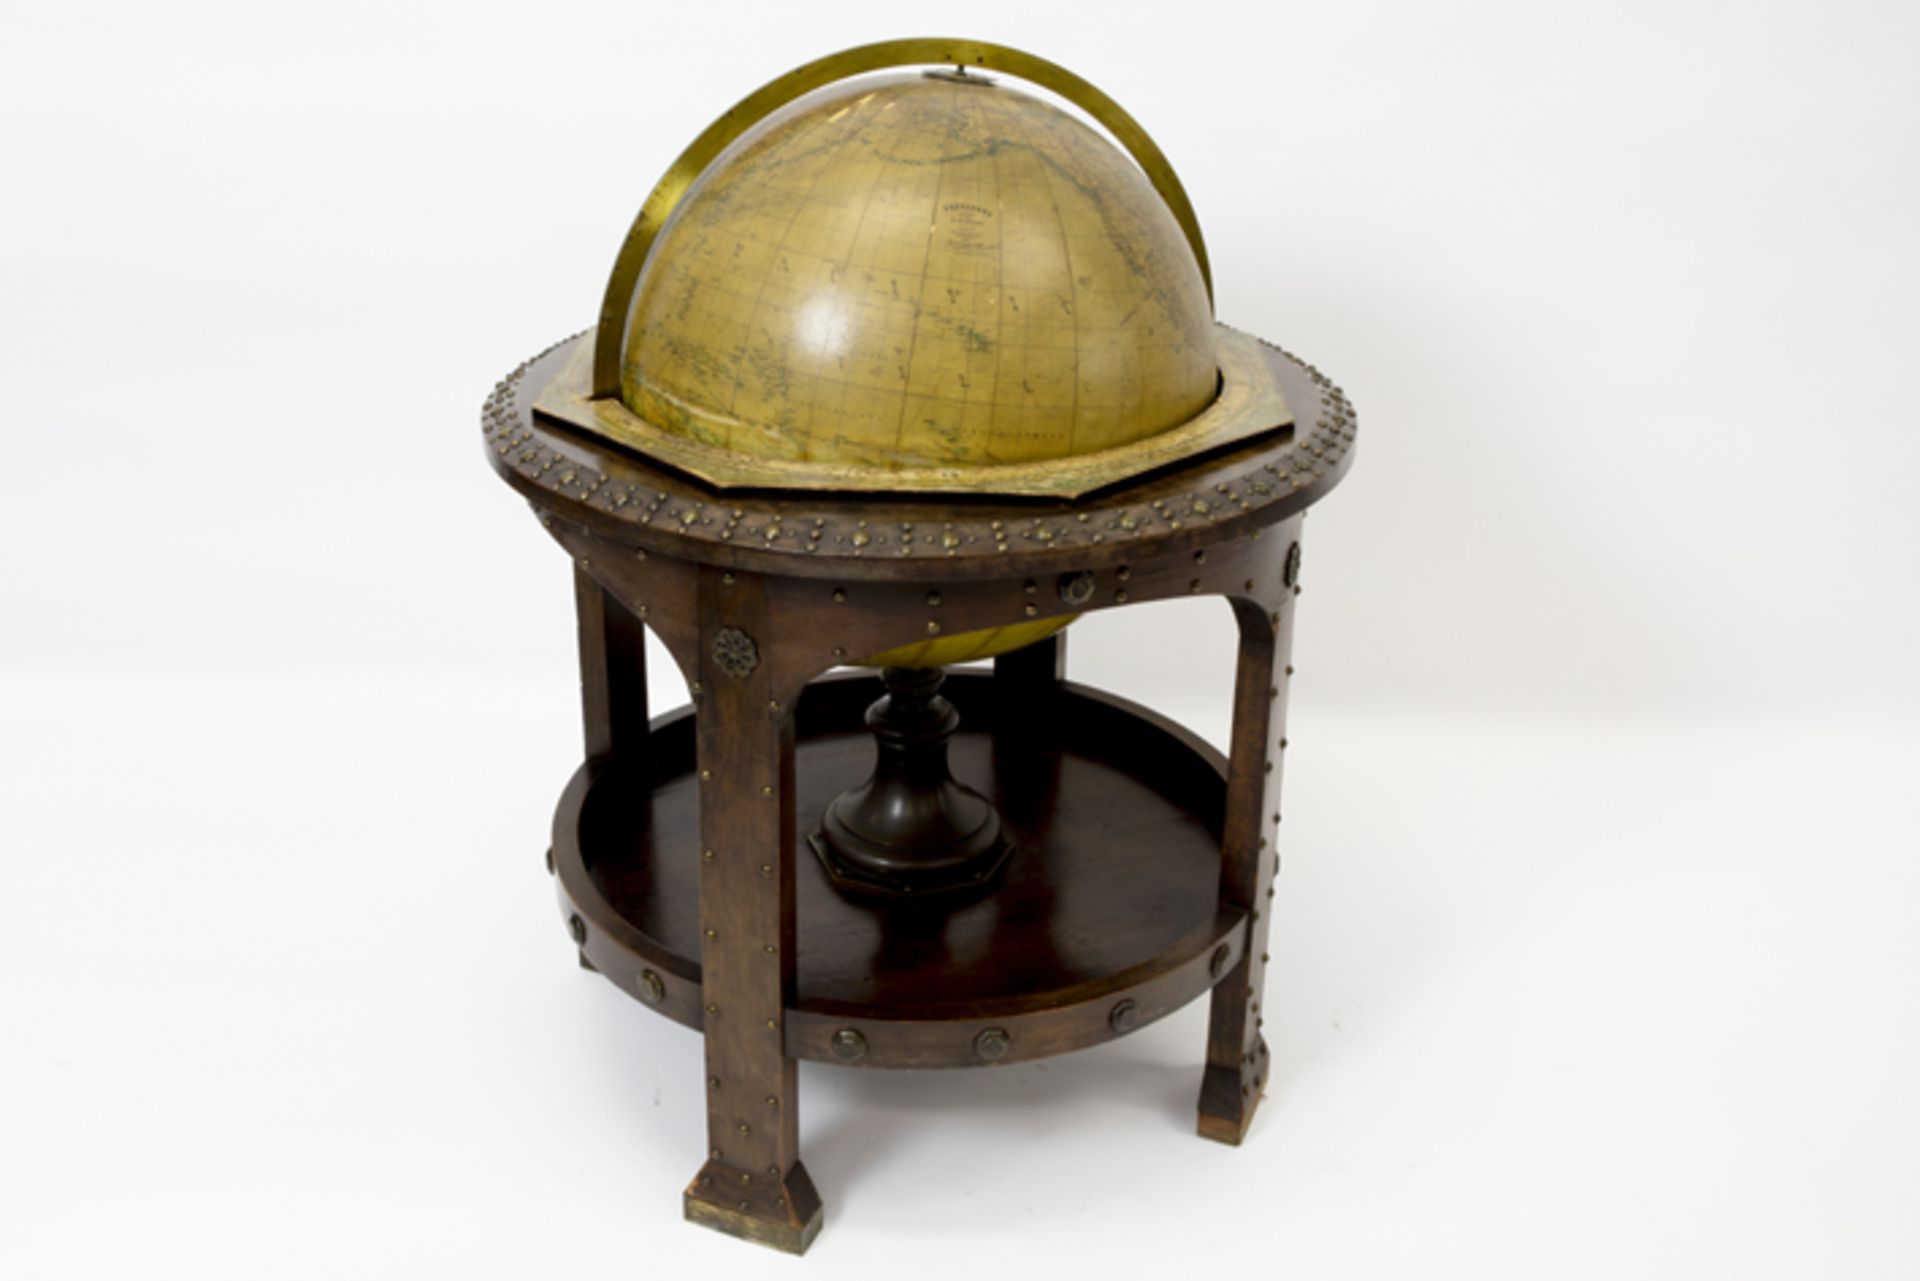 decorative marked "Columbus Erdglobus" globe with a map designed by Heinrich Kiefert - in stand - Image 2 of 6